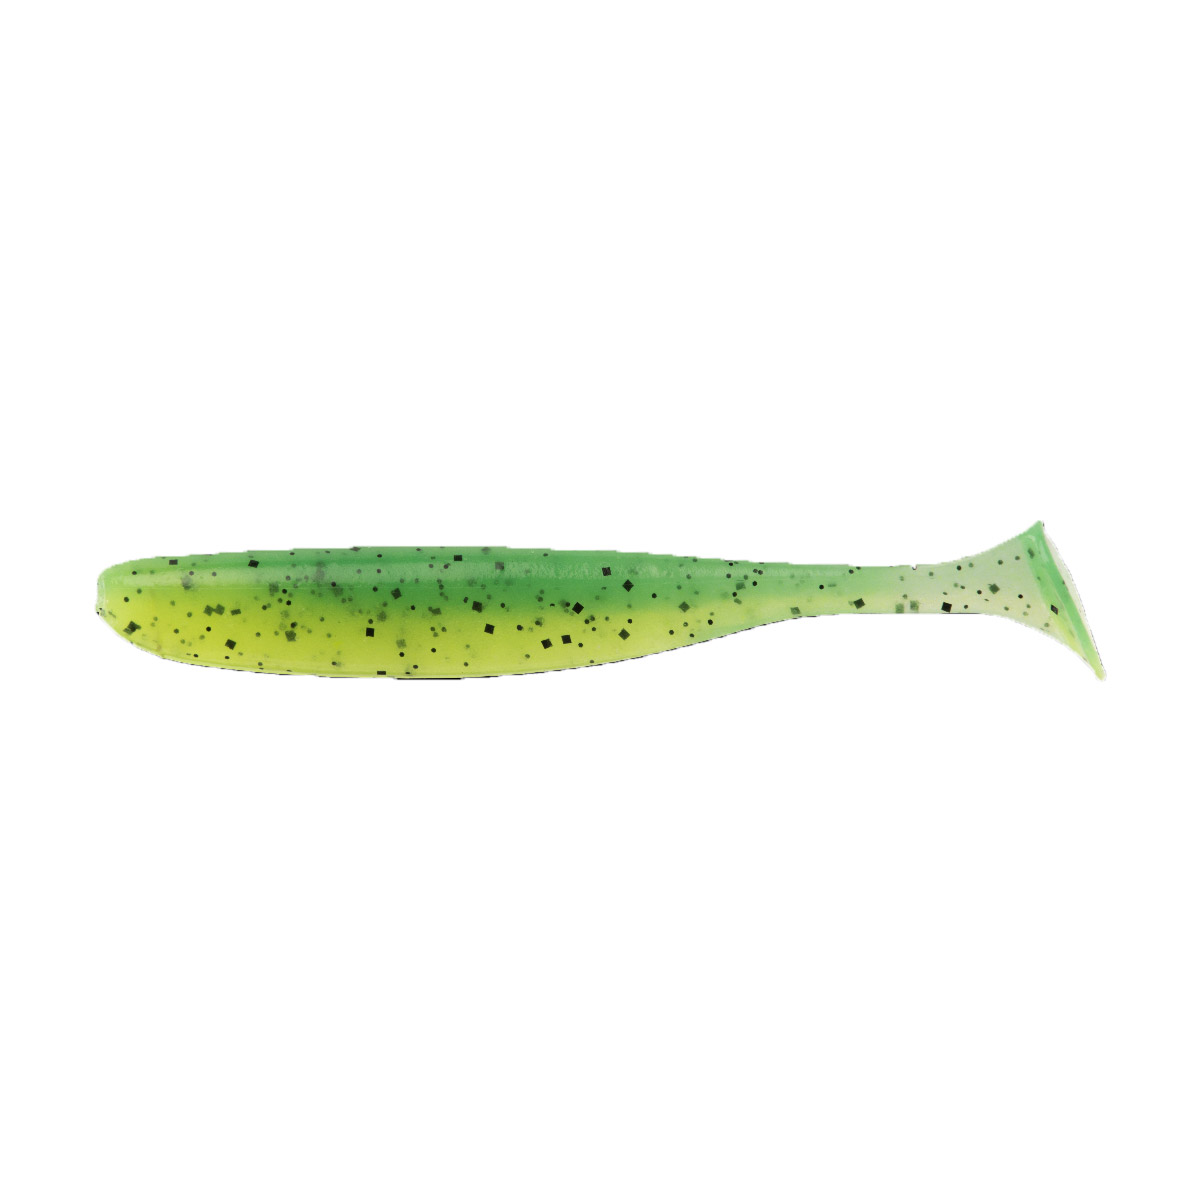 Keitech Easy Shiner 4 inch -  Lime Chartreuse.